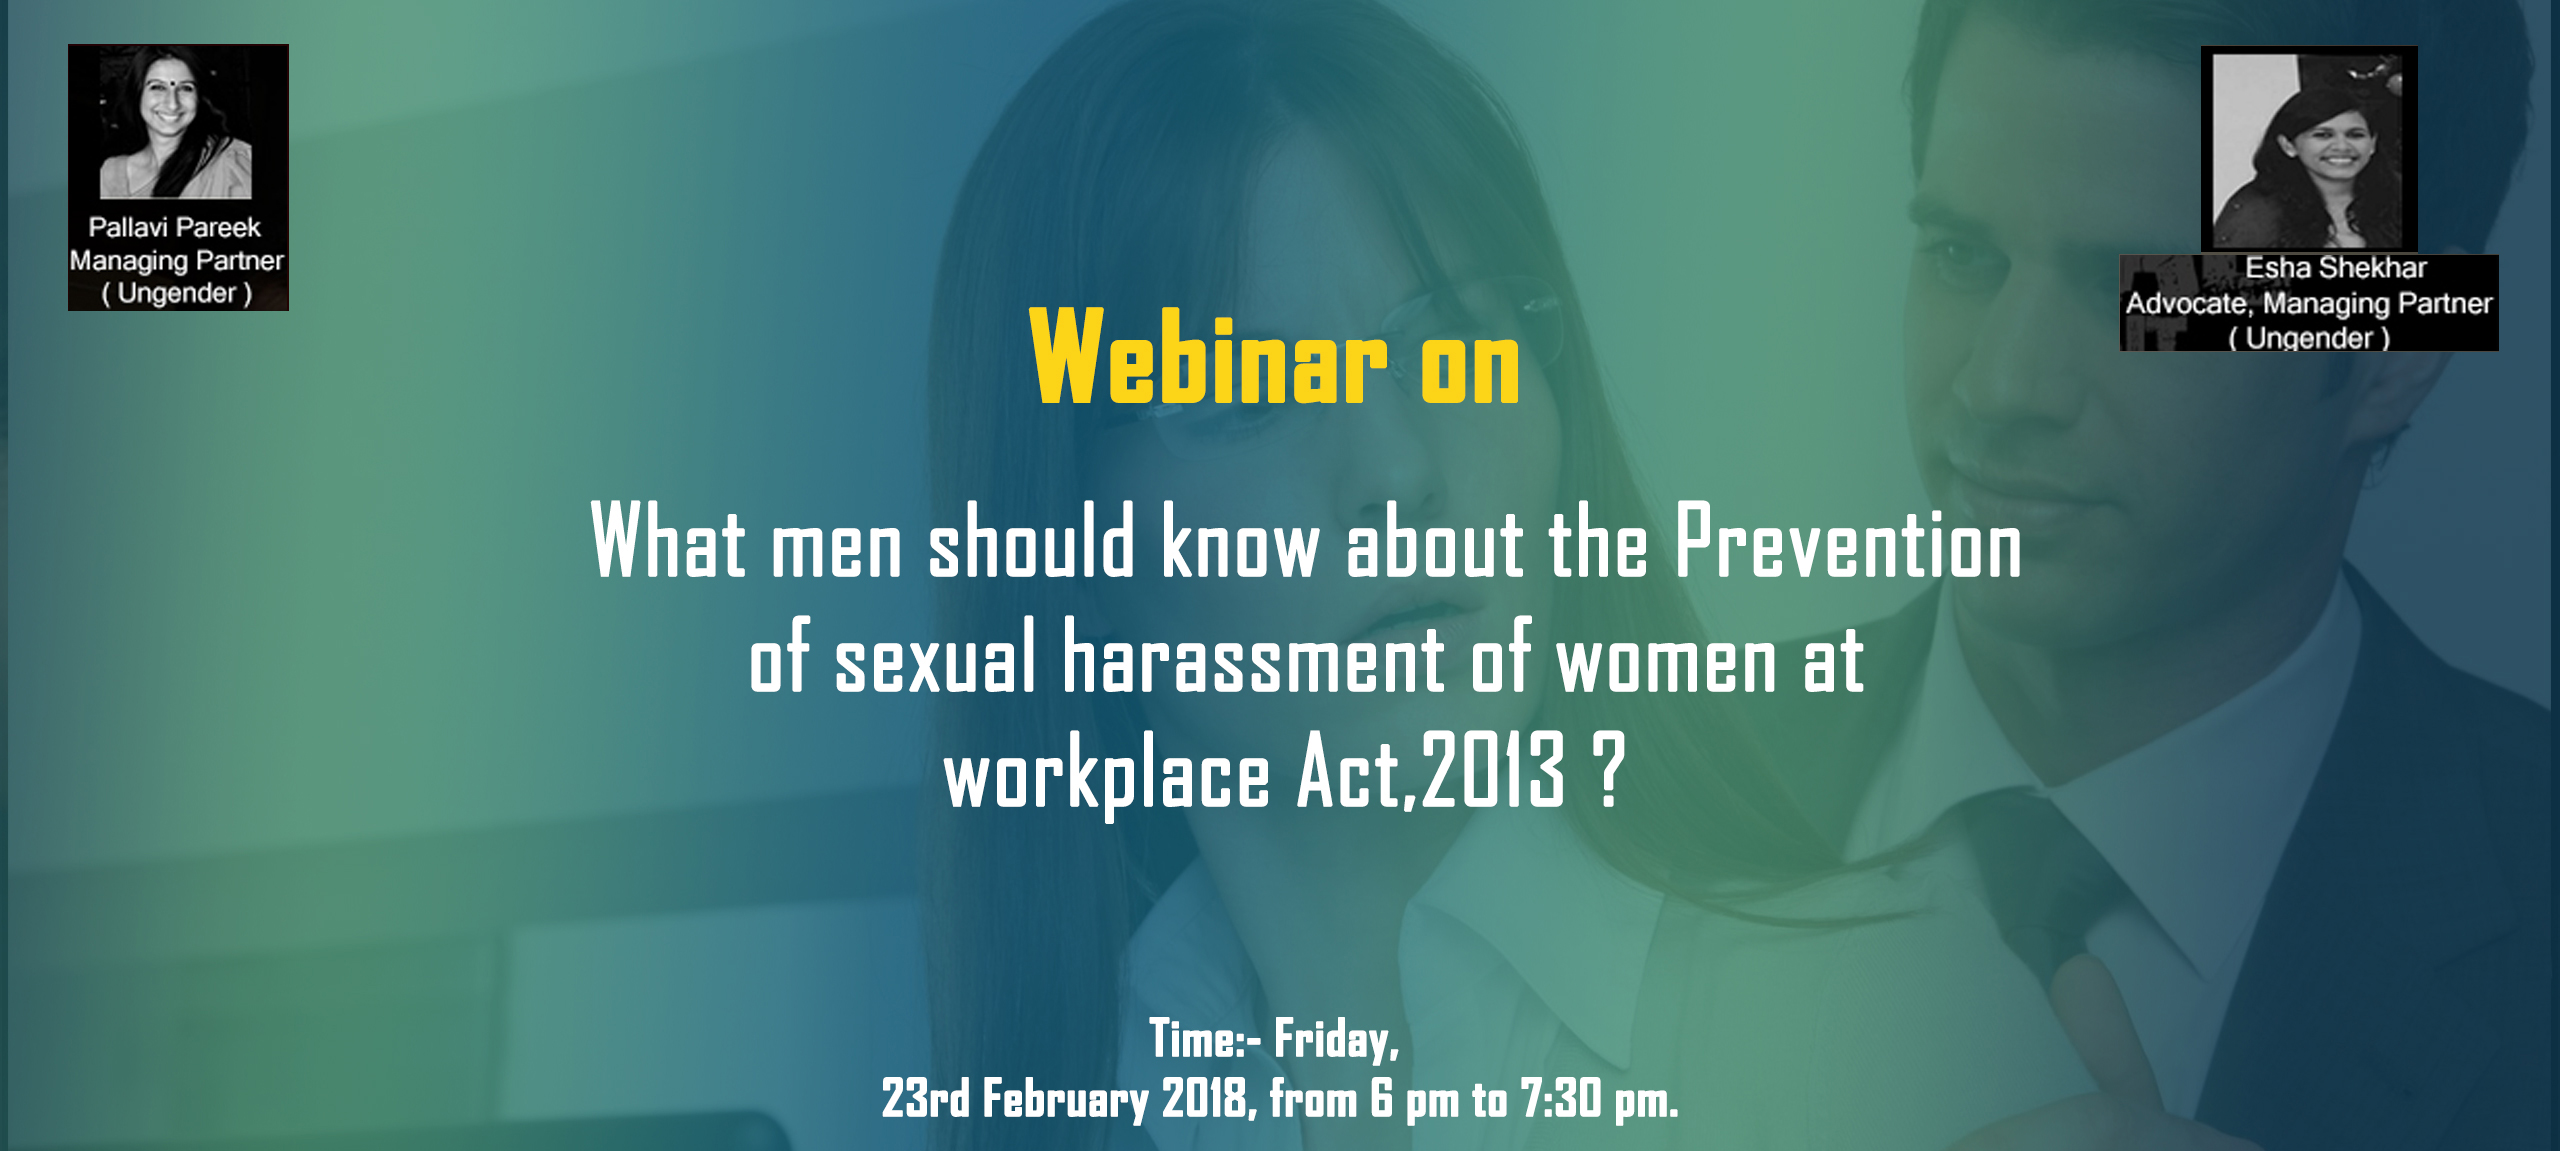 What men should know about the Prevention of sexual harassment of women at workplace Act, 2013?